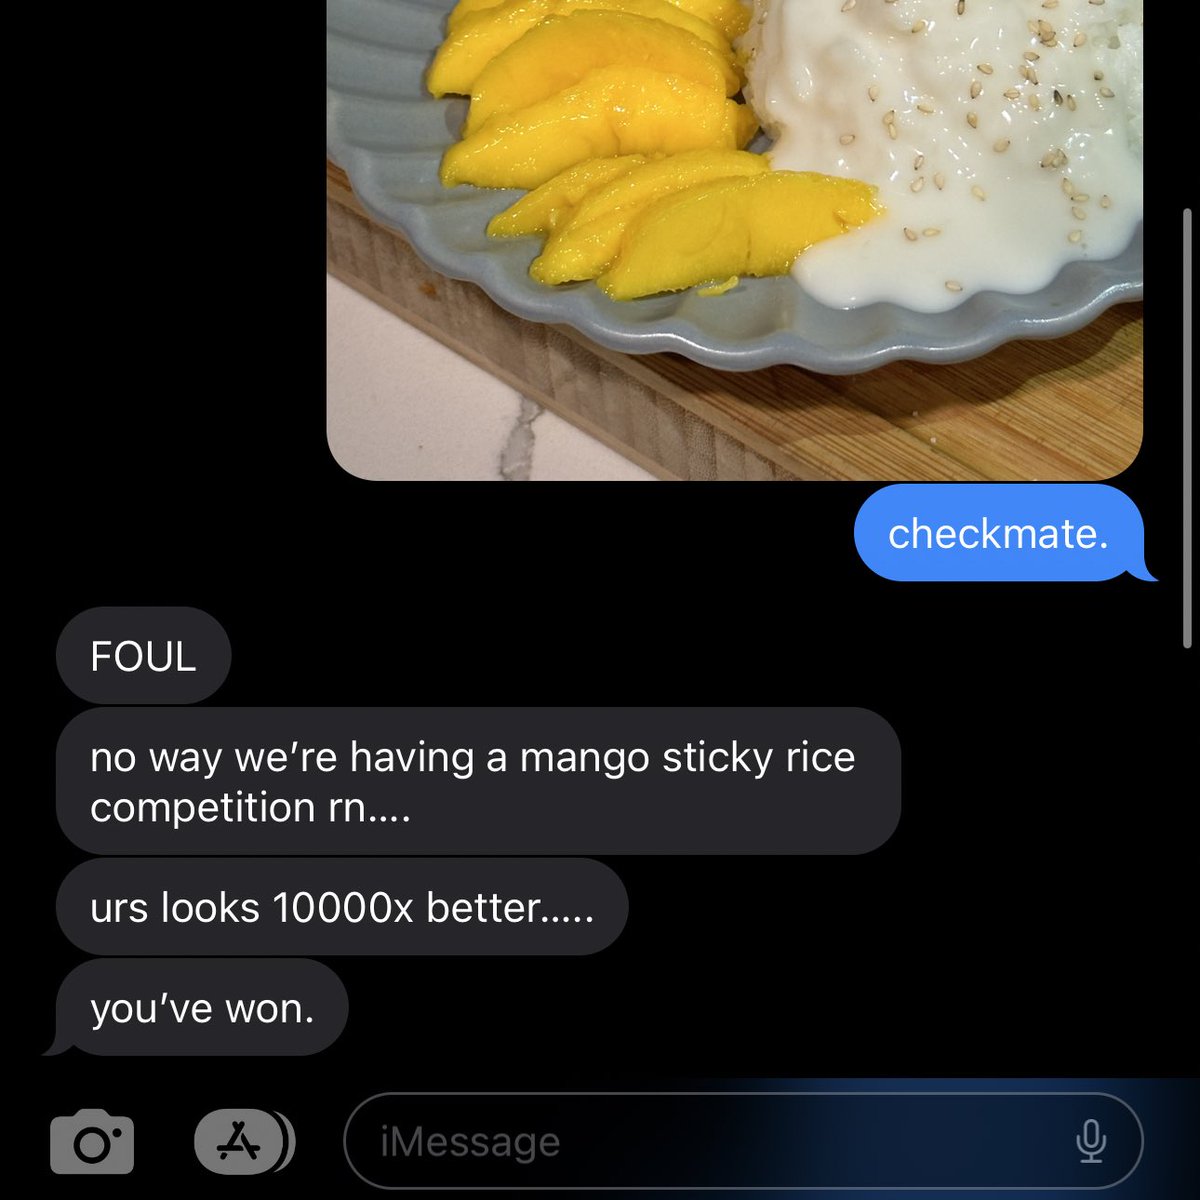 unleashed the monster (someone who makes mango sticky rice) in me